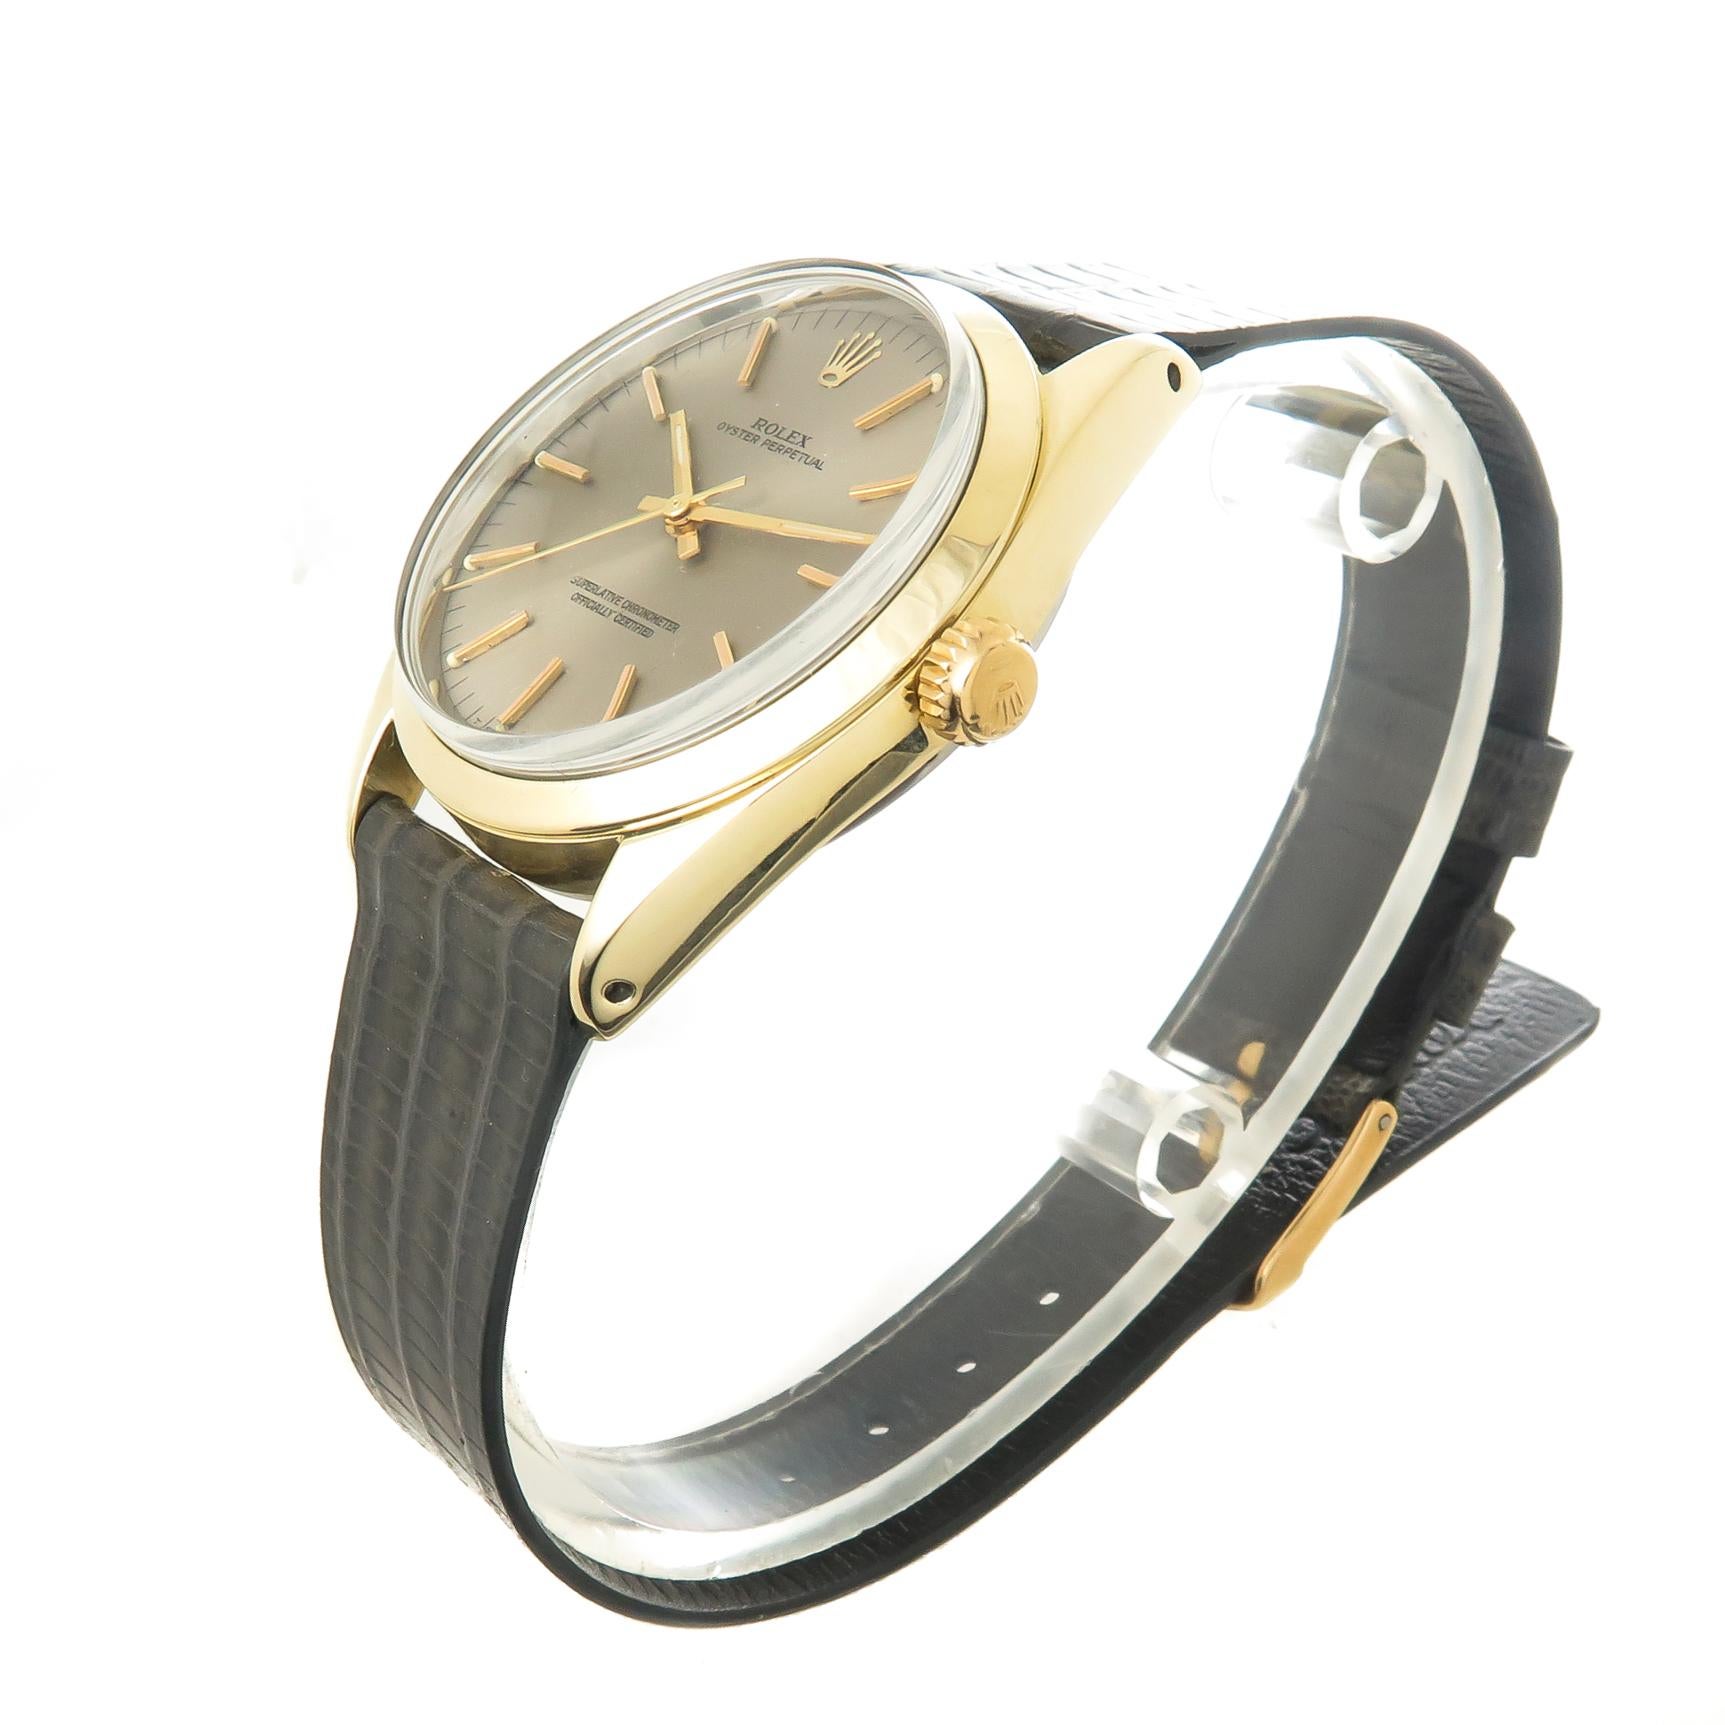 Circa 1967 Rolex Oyster Perpetual Reference 1024, 34 MM Gold Shell case with Stainless Steel Back, Caliber 1570 Automatic, self winding movement. Light Silver Gray dial with raised Gold markers, Gold markers and a sweep seconds hand. New Gray Lizard